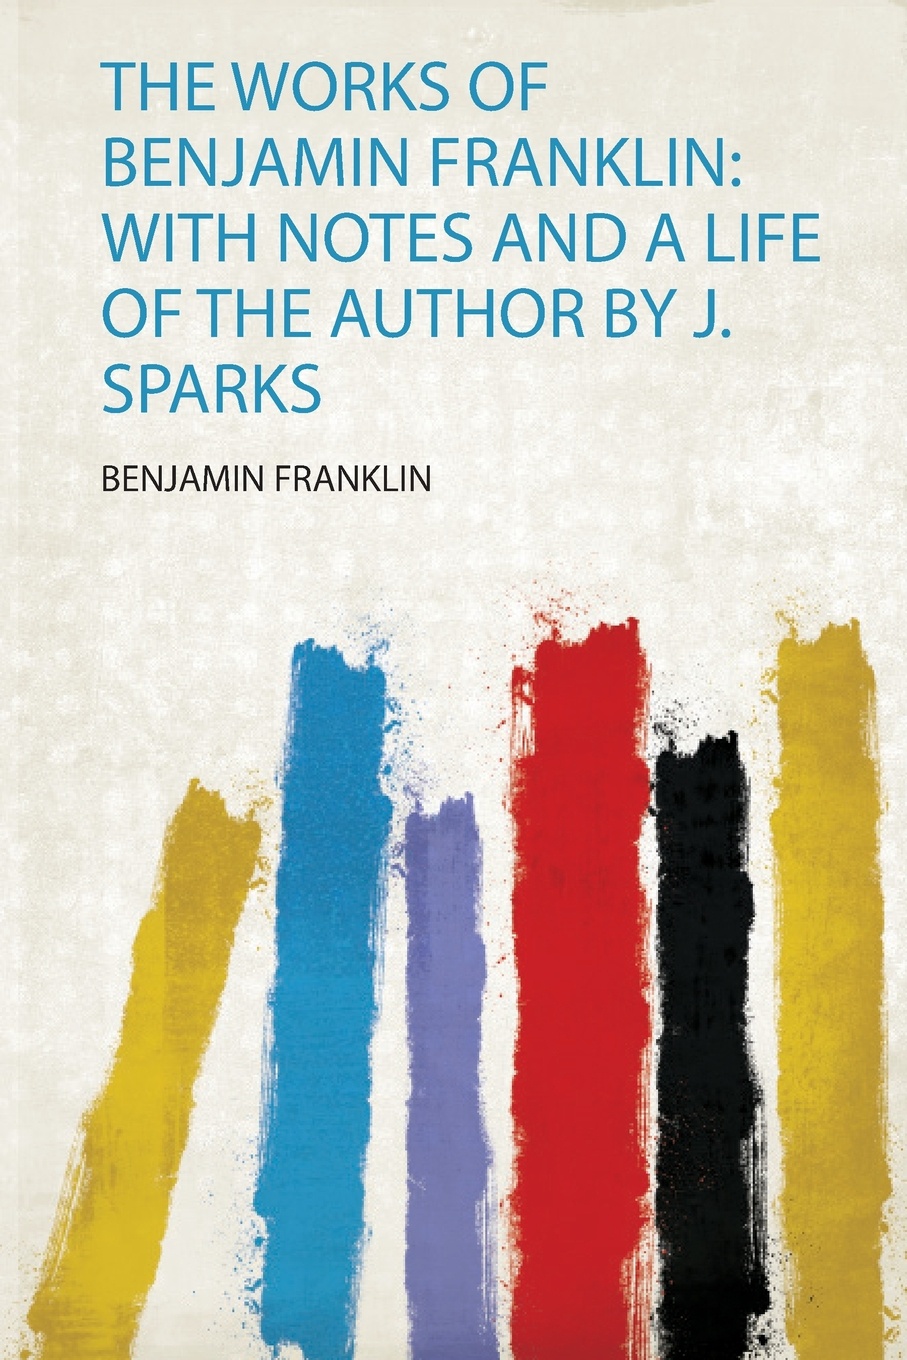 The Works of Benjamin Franklin. With Notes and a Life of the Author by J. Sparks